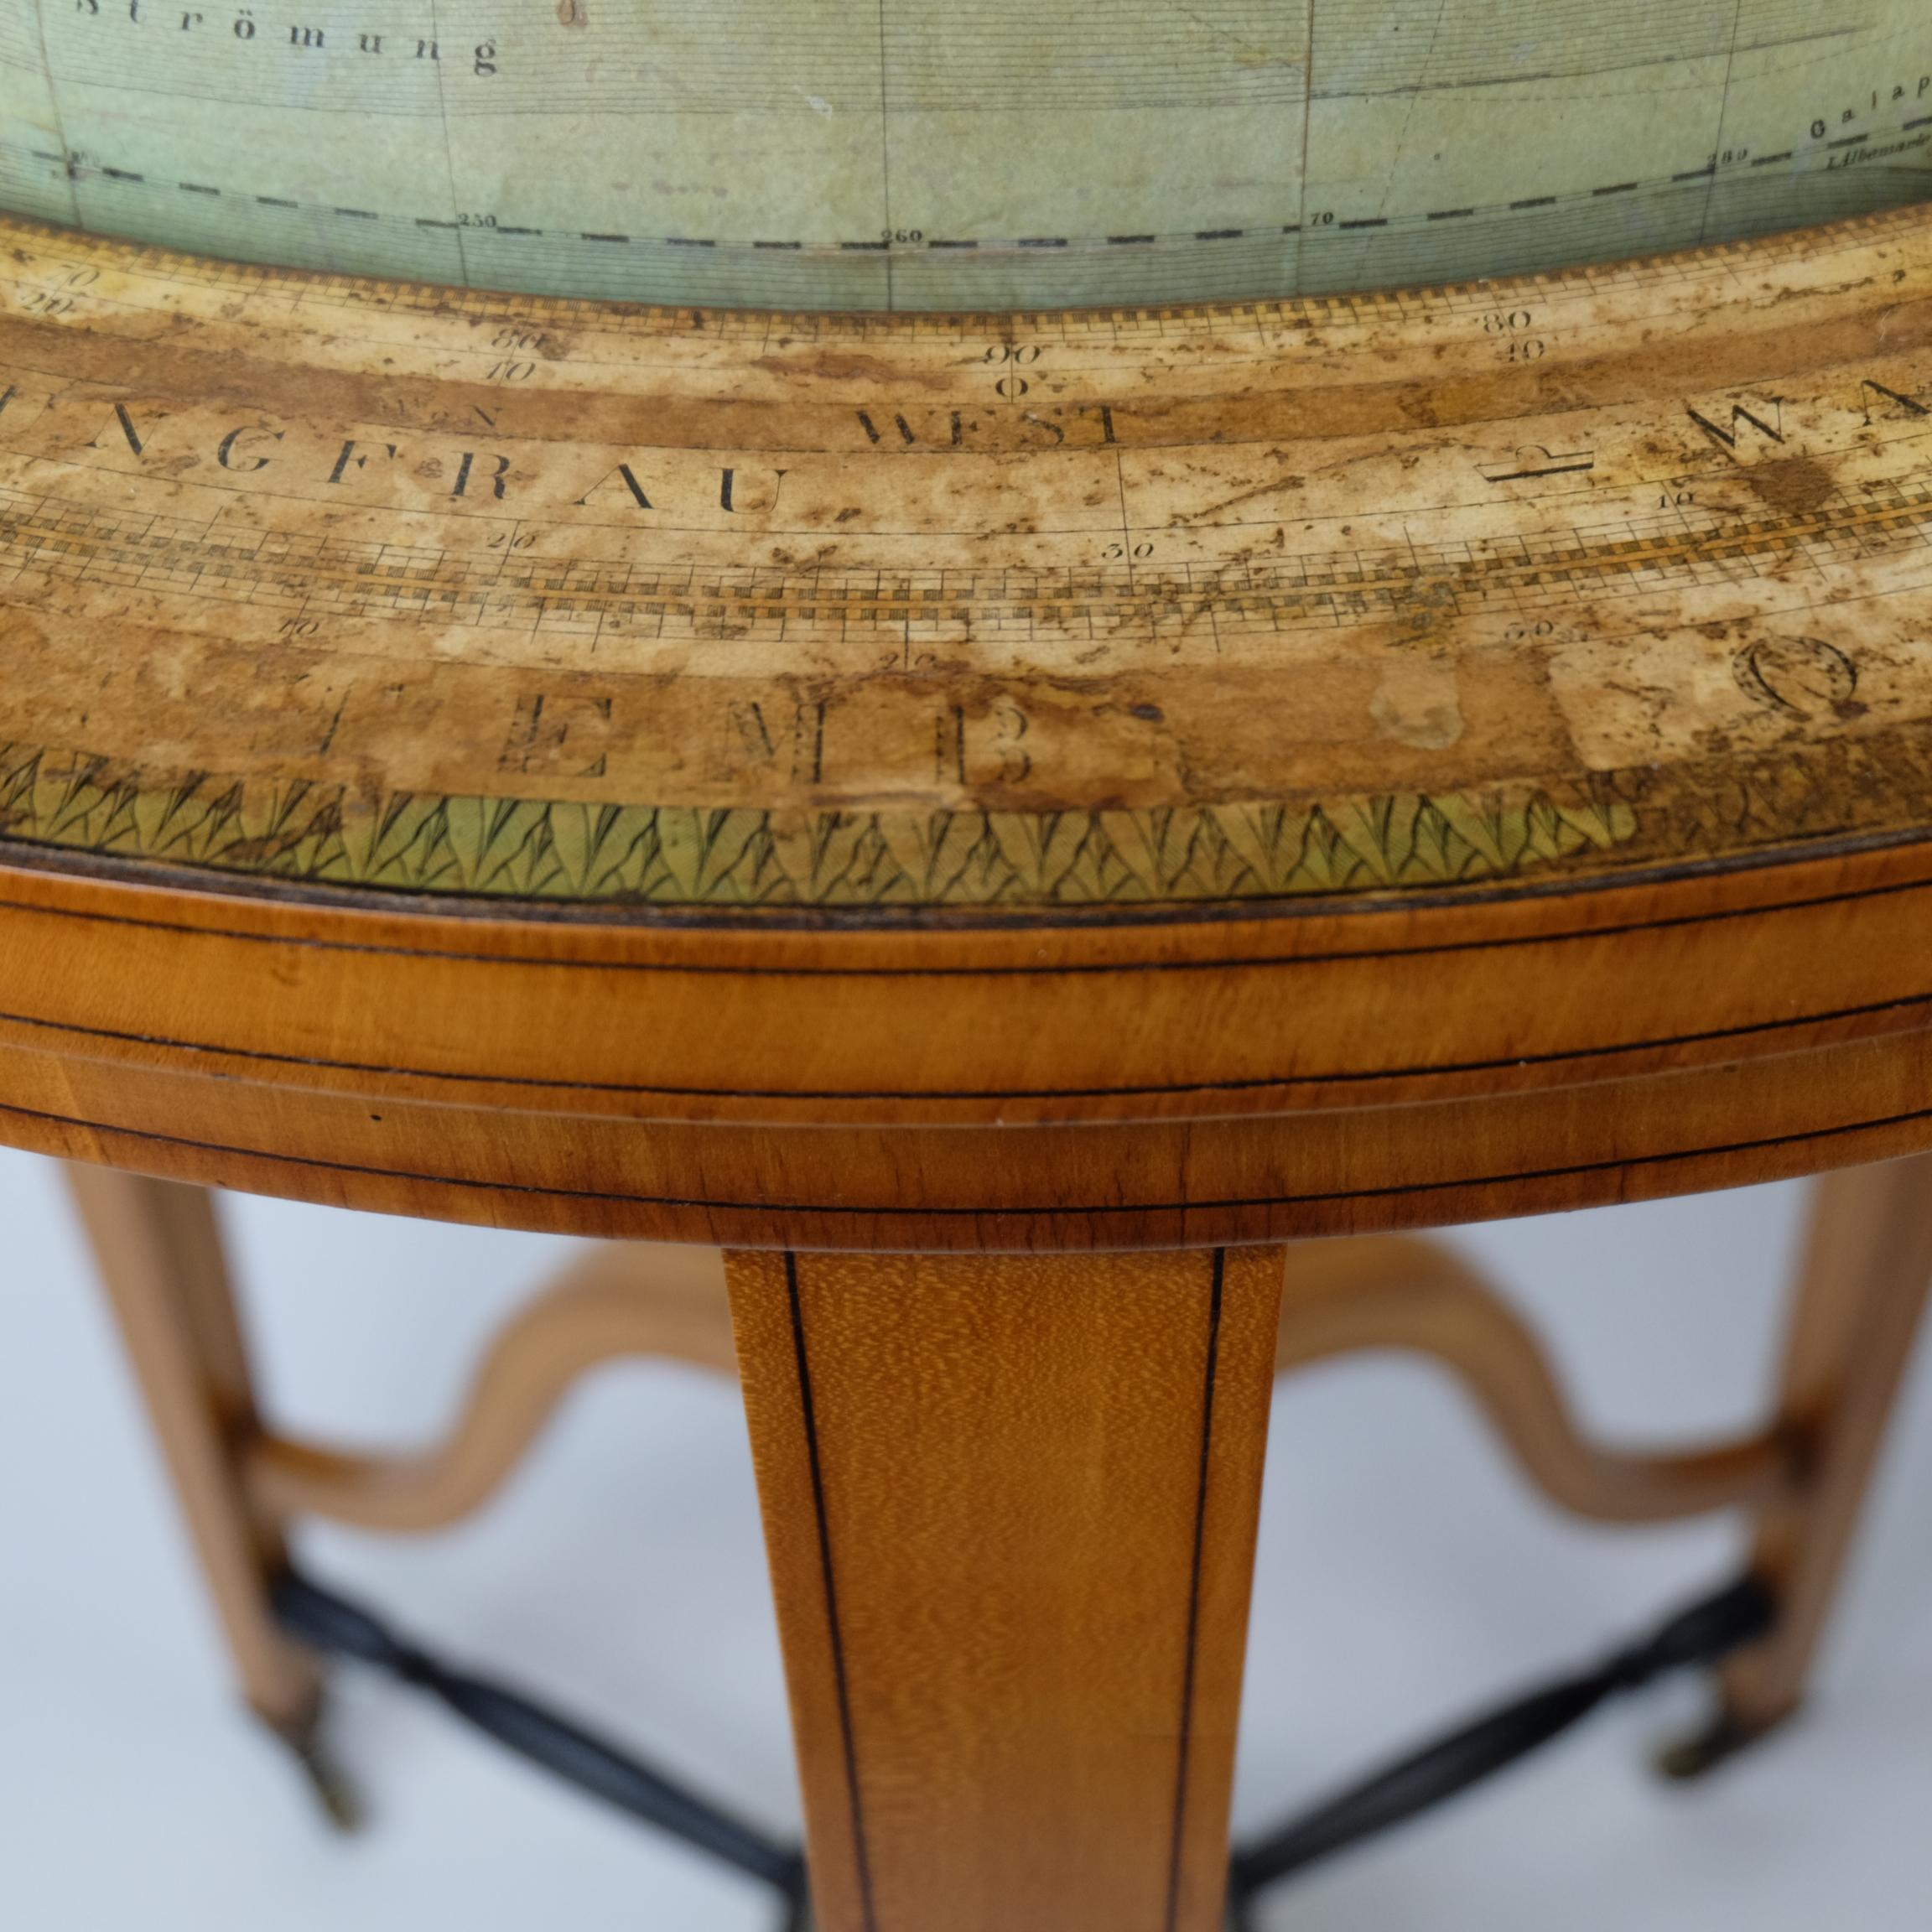 Wood 19th Century Globe of the Firm Ernst Schotte 'Berlin' in the German Language For Sale